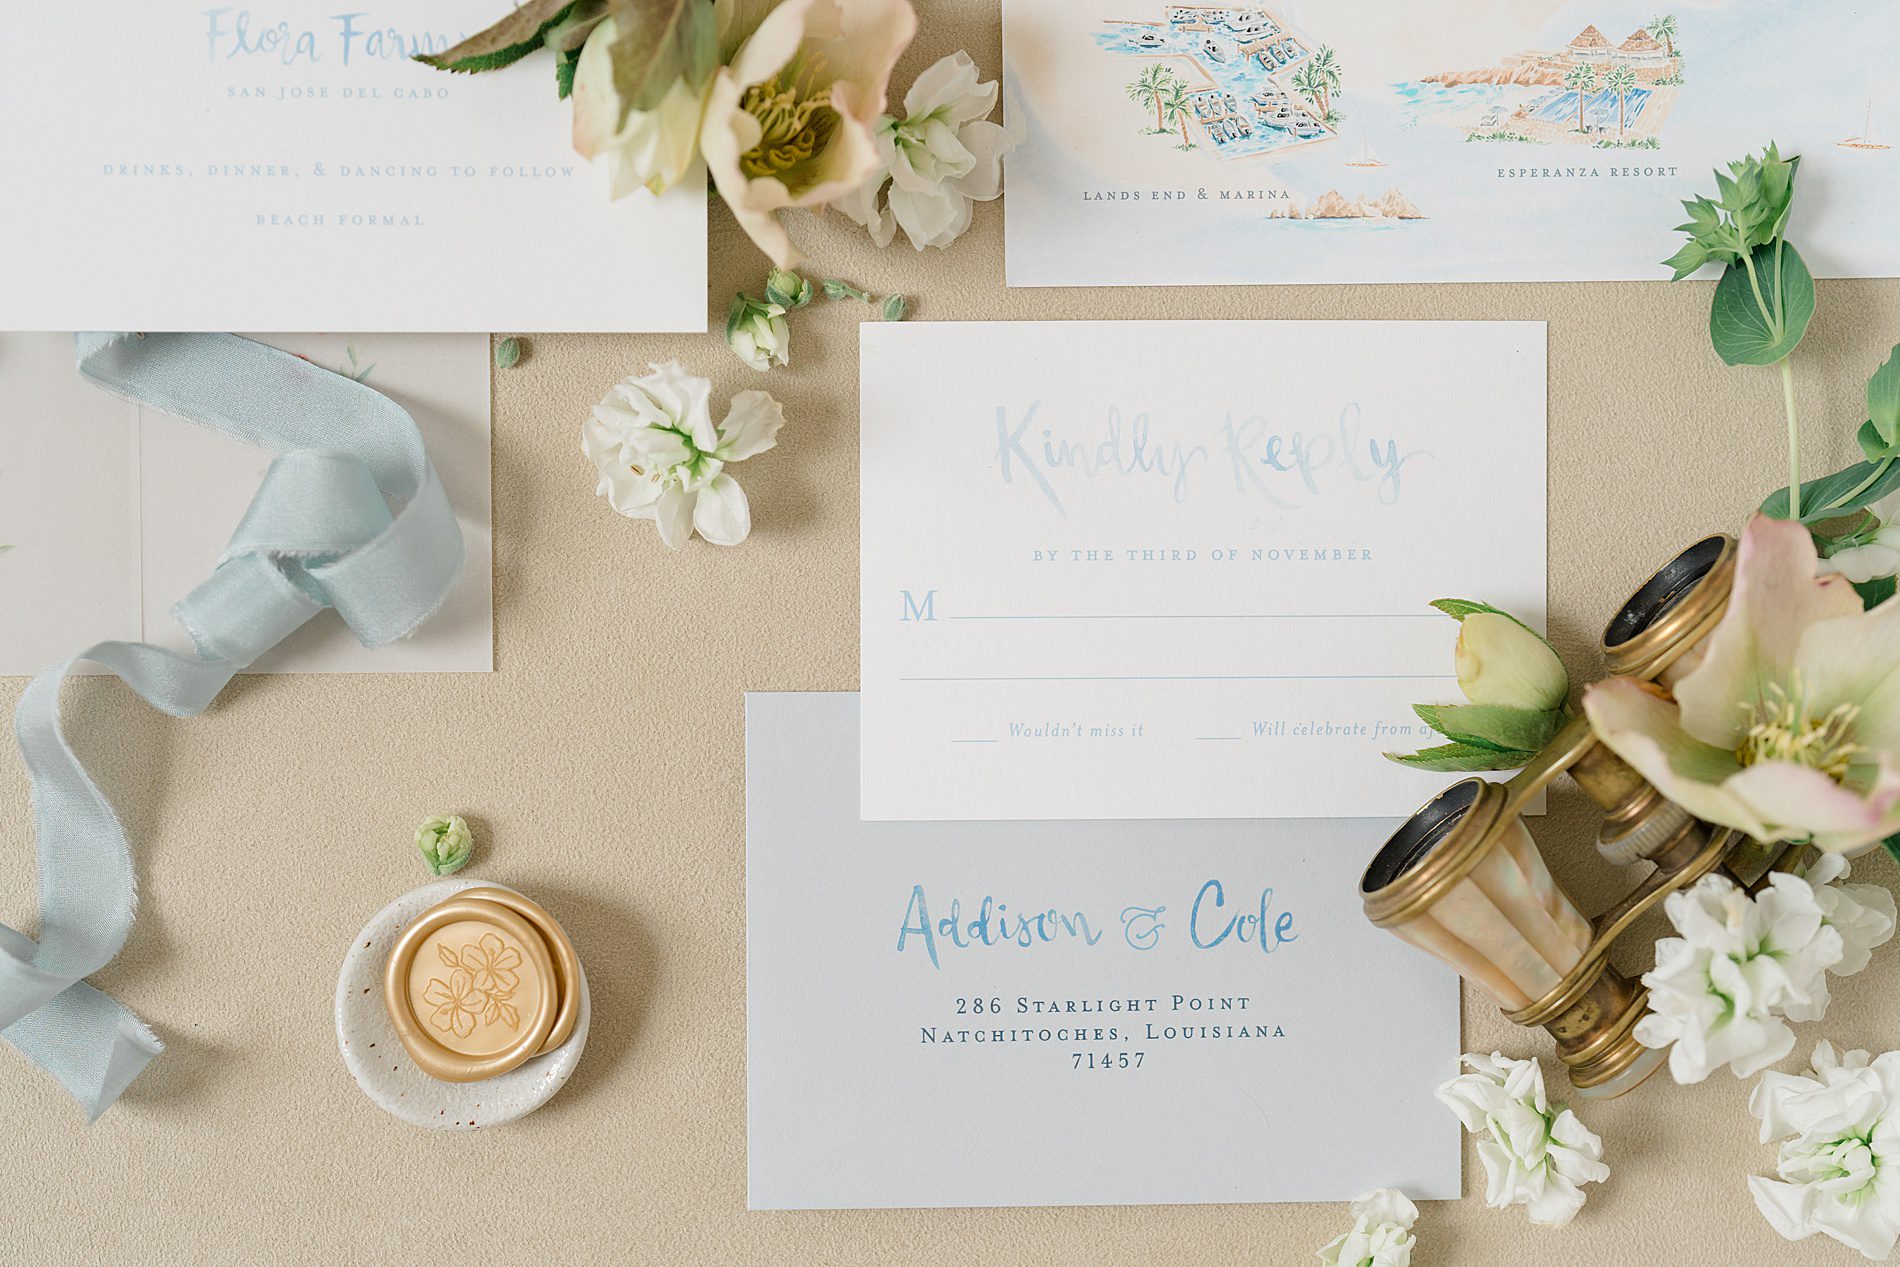 Flatlay photography services by Amber Dawn Photography  